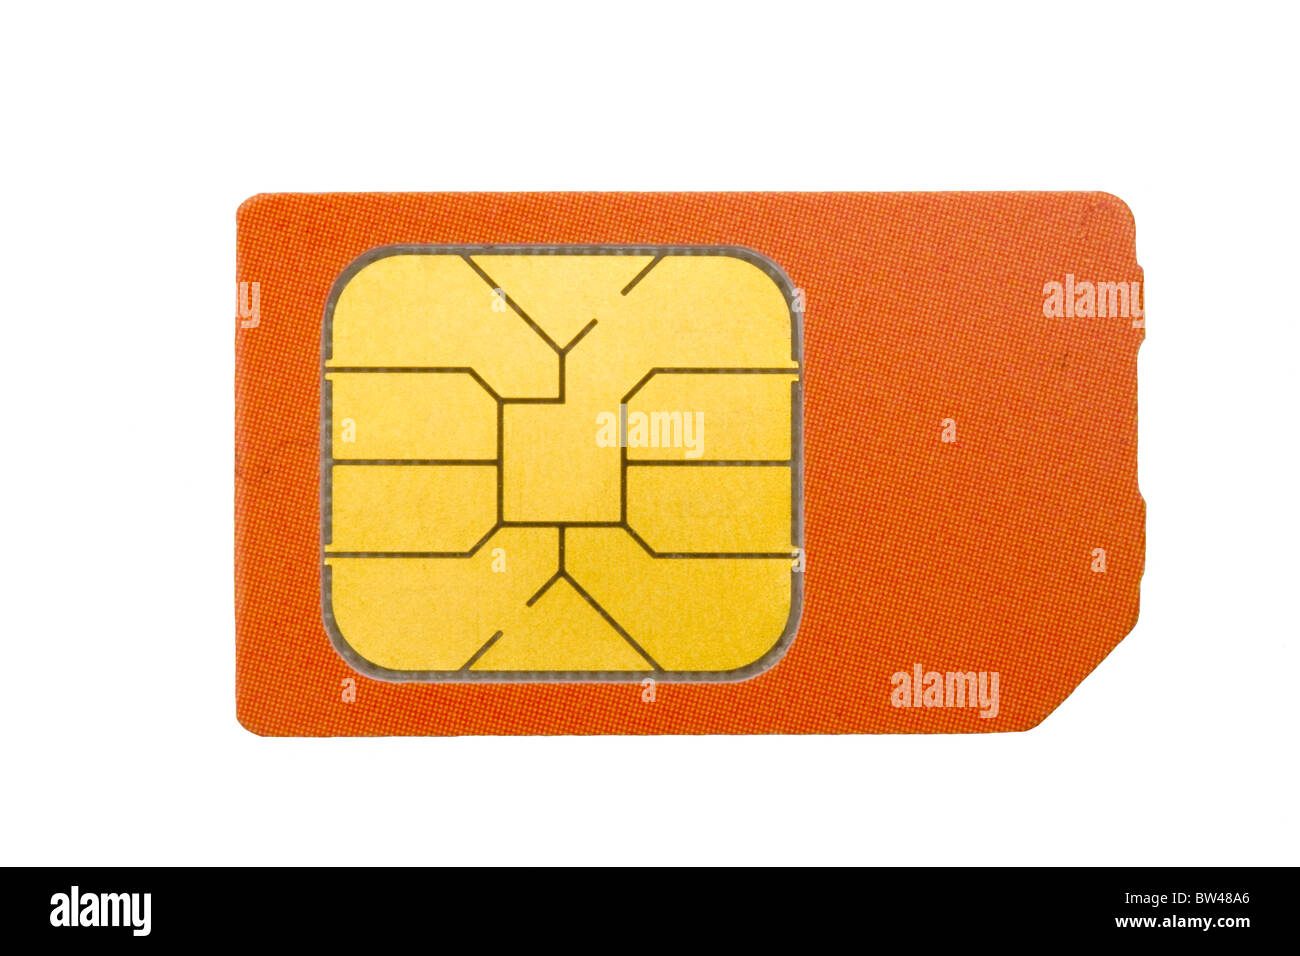 Sim card for mobile phone isolated on white background Stock Photo